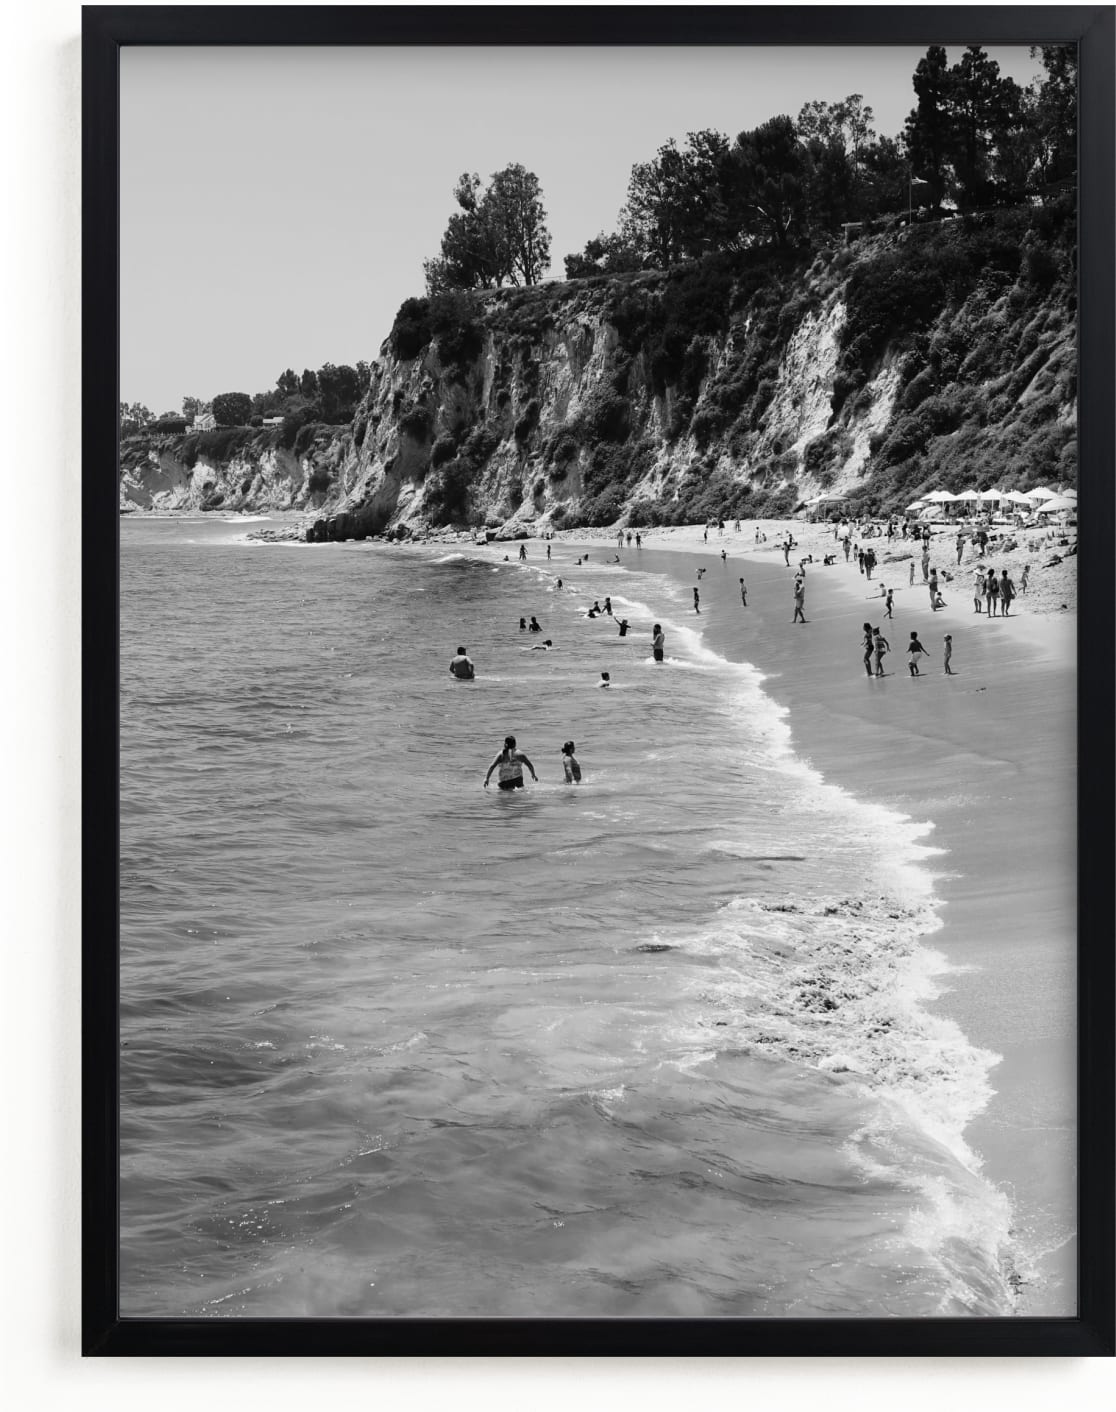 This is a black and white art by Jan Kessel called Day at the Beach.